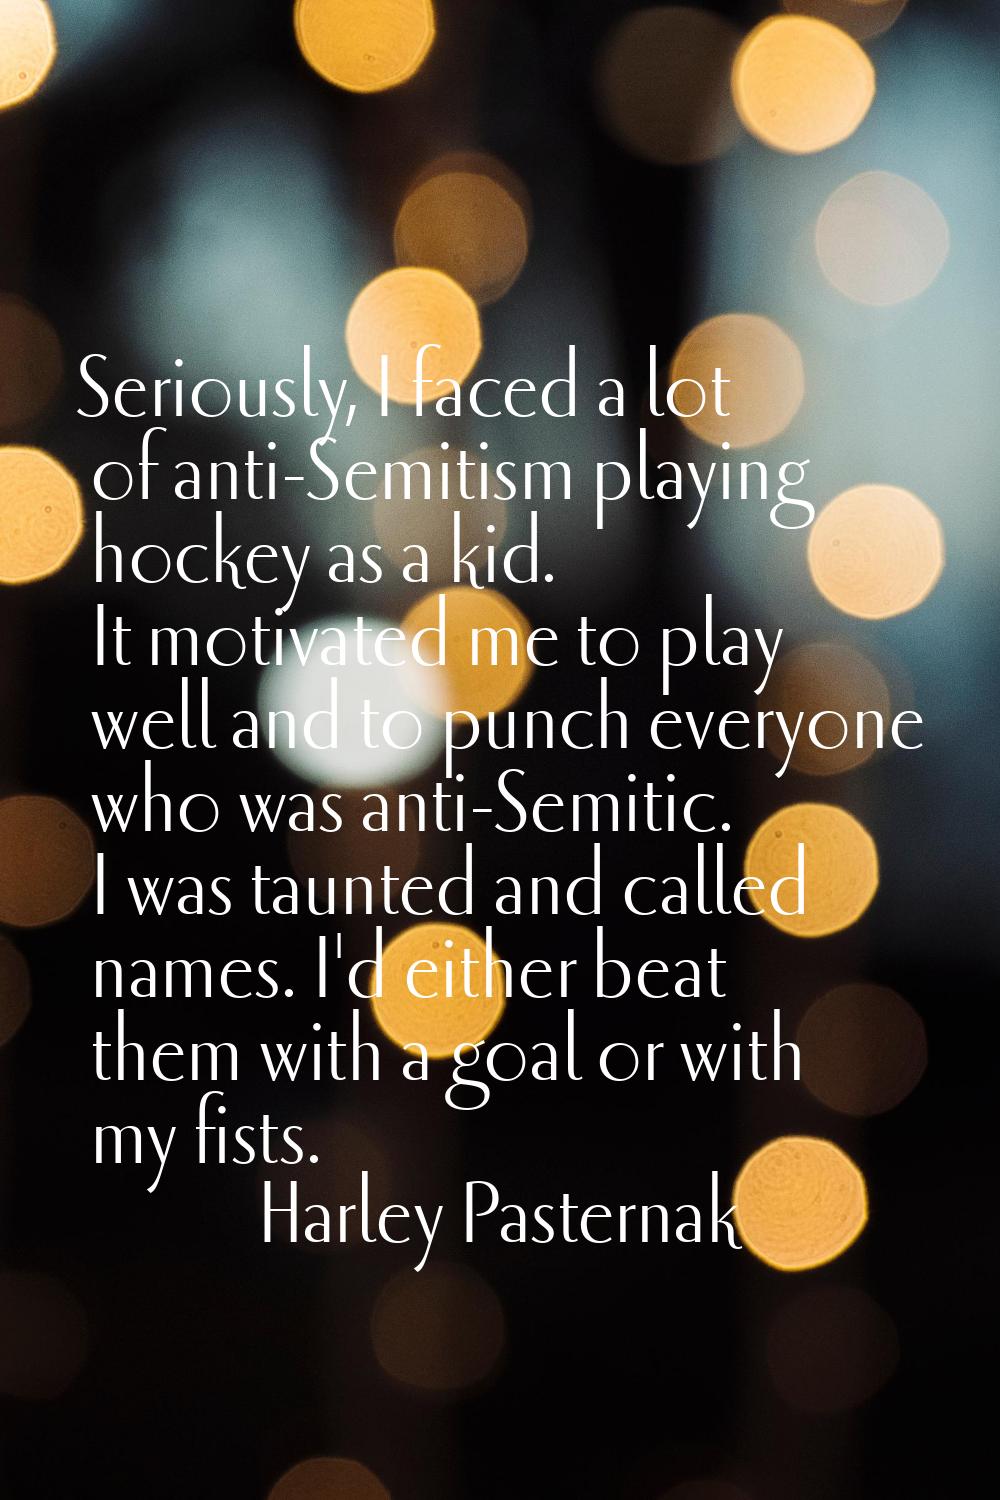 Seriously, I faced a lot of anti-Semitism playing hockey as a kid. It motivated me to play well and